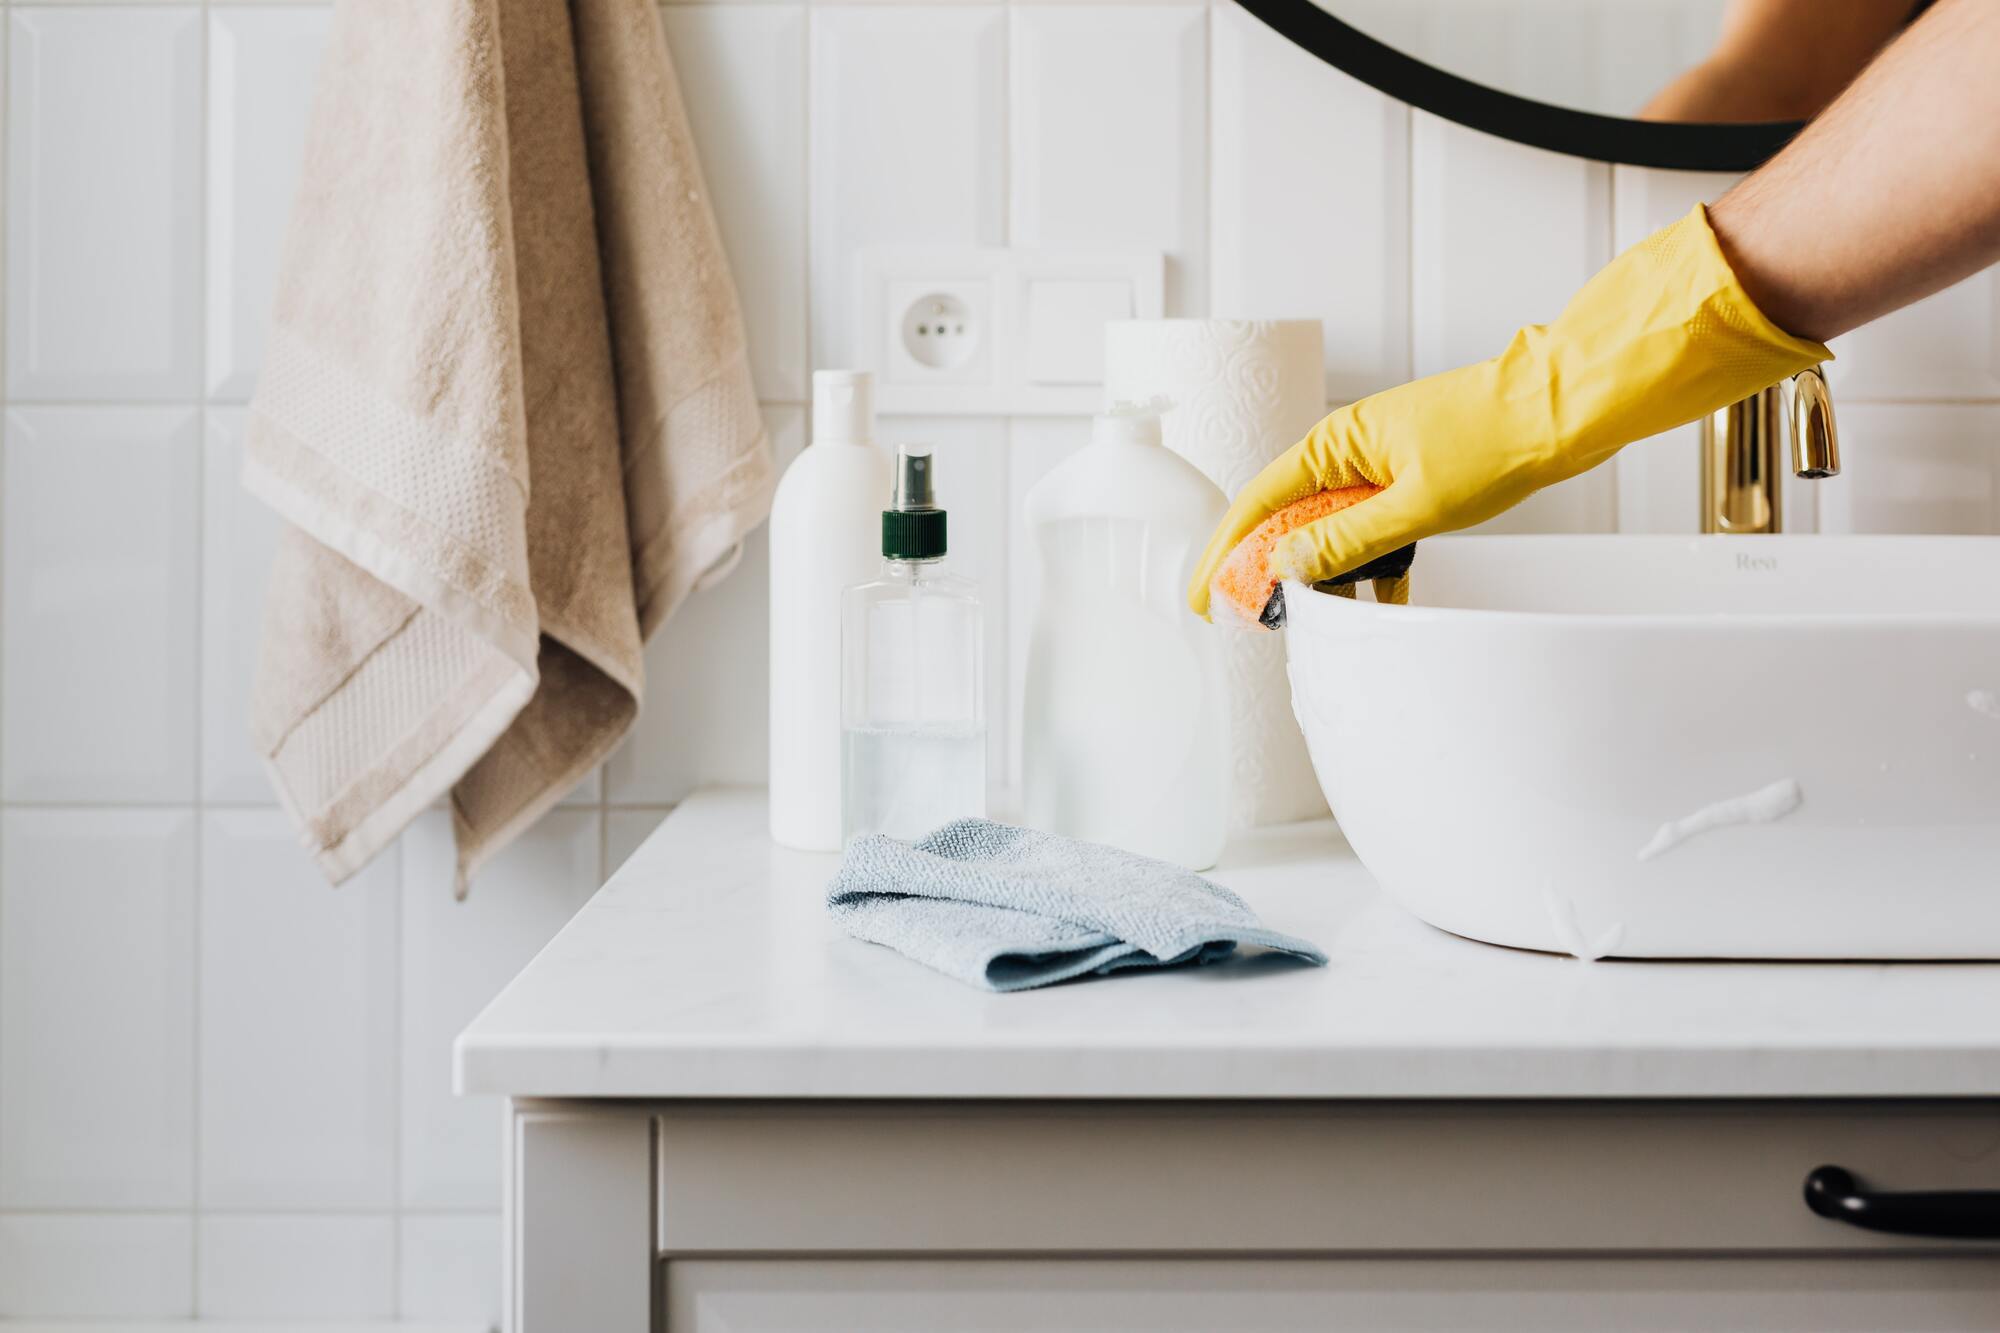 How to quickly remove odor from towels